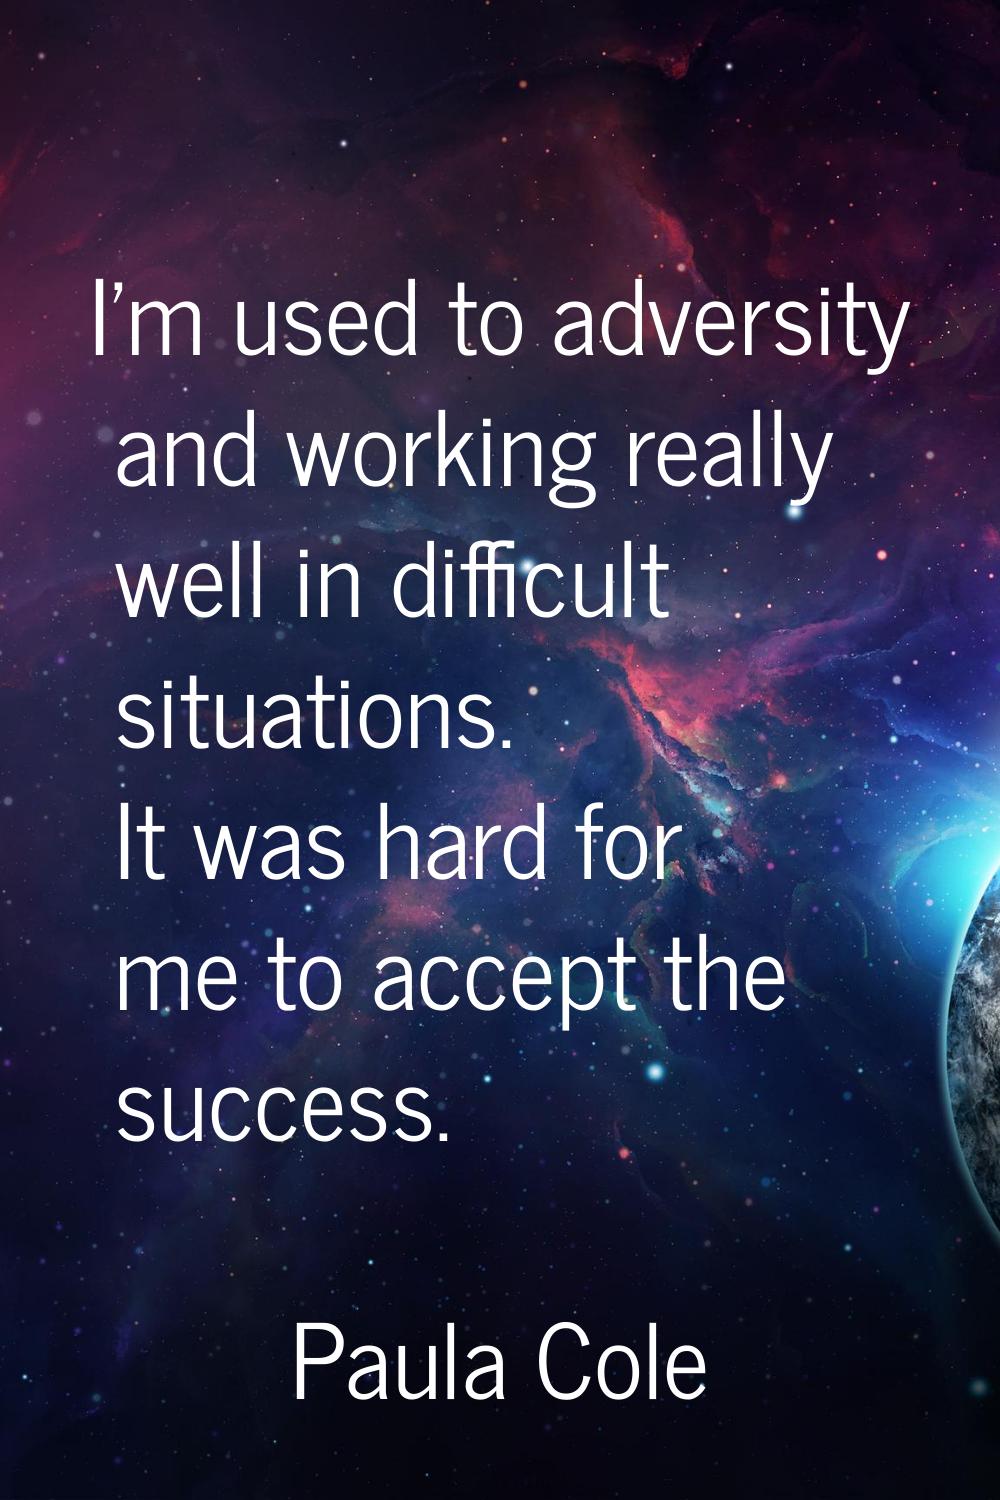 I'm used to adversity and working really well in difficult situations. It was hard for me to accept